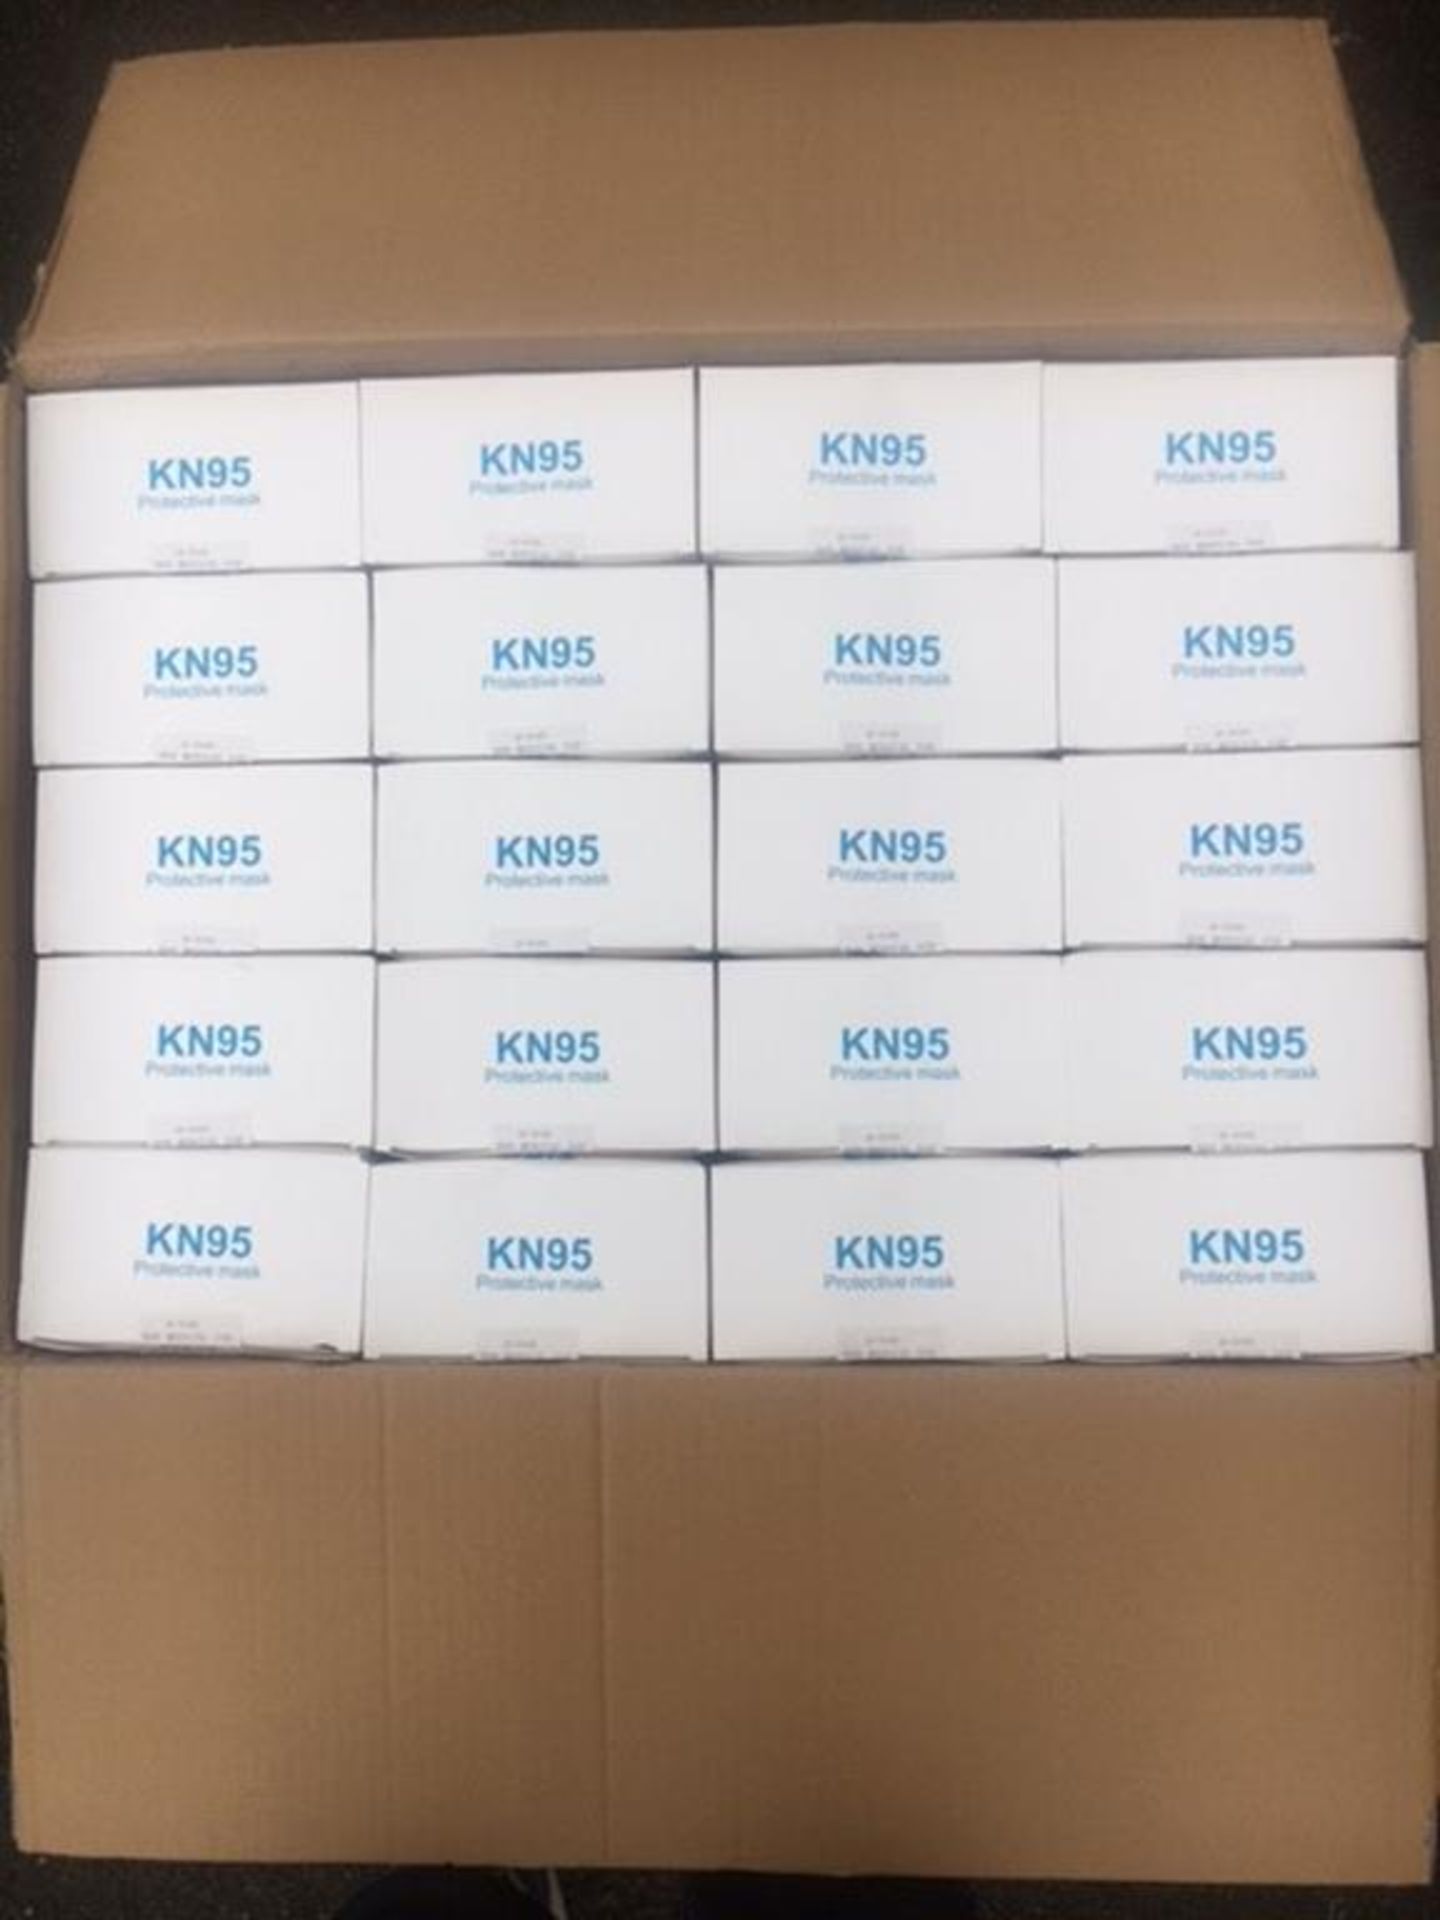 3600 Type KN95 Disposable Face Masks - Image 5 of 11